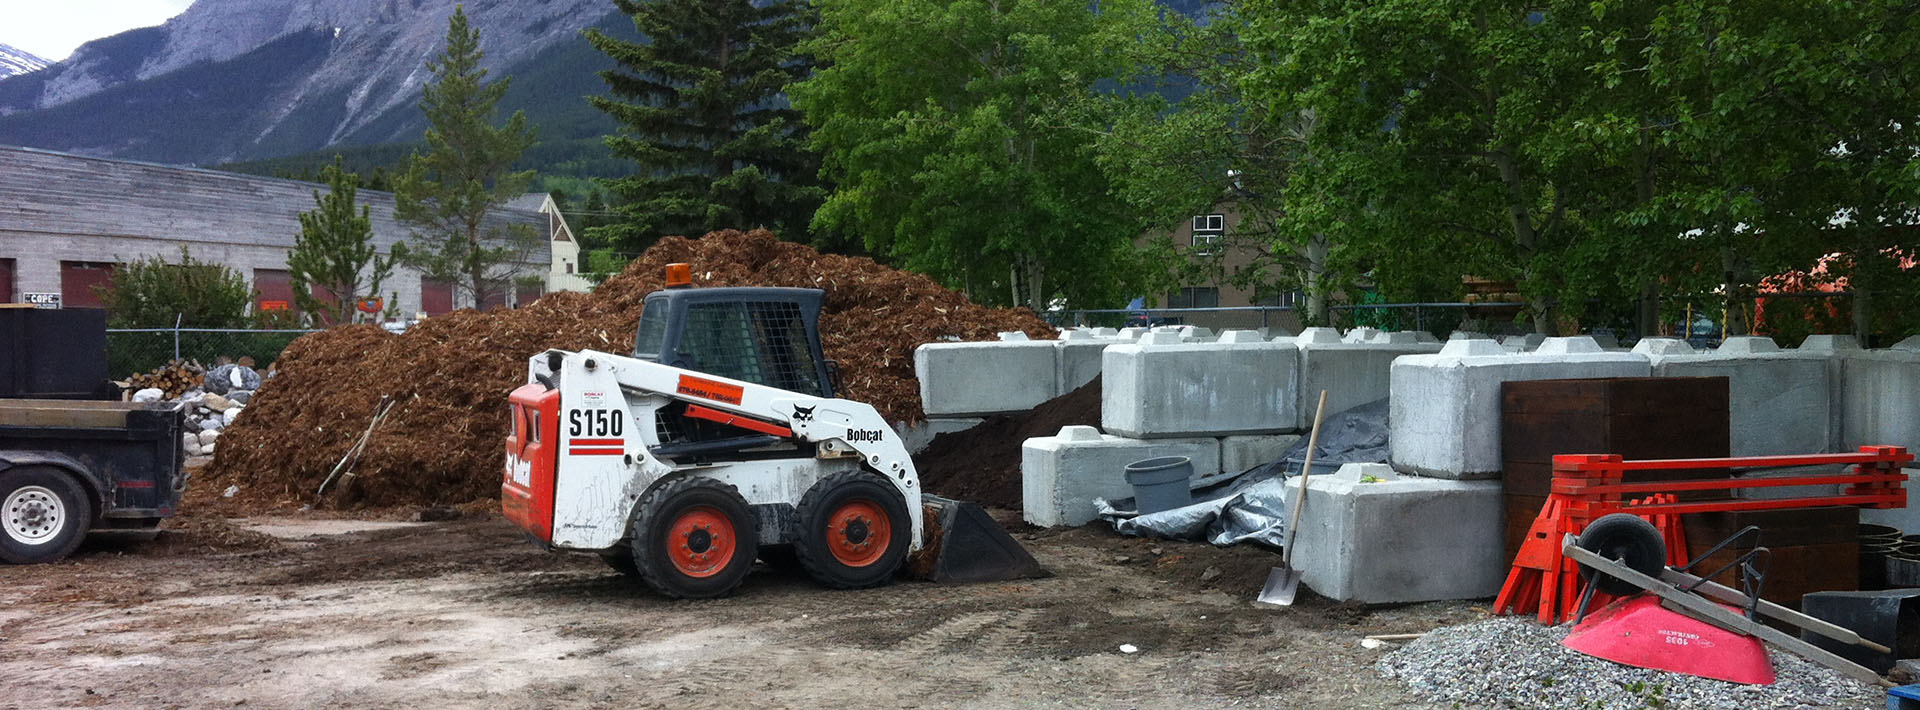 Canmore landscaping supplies